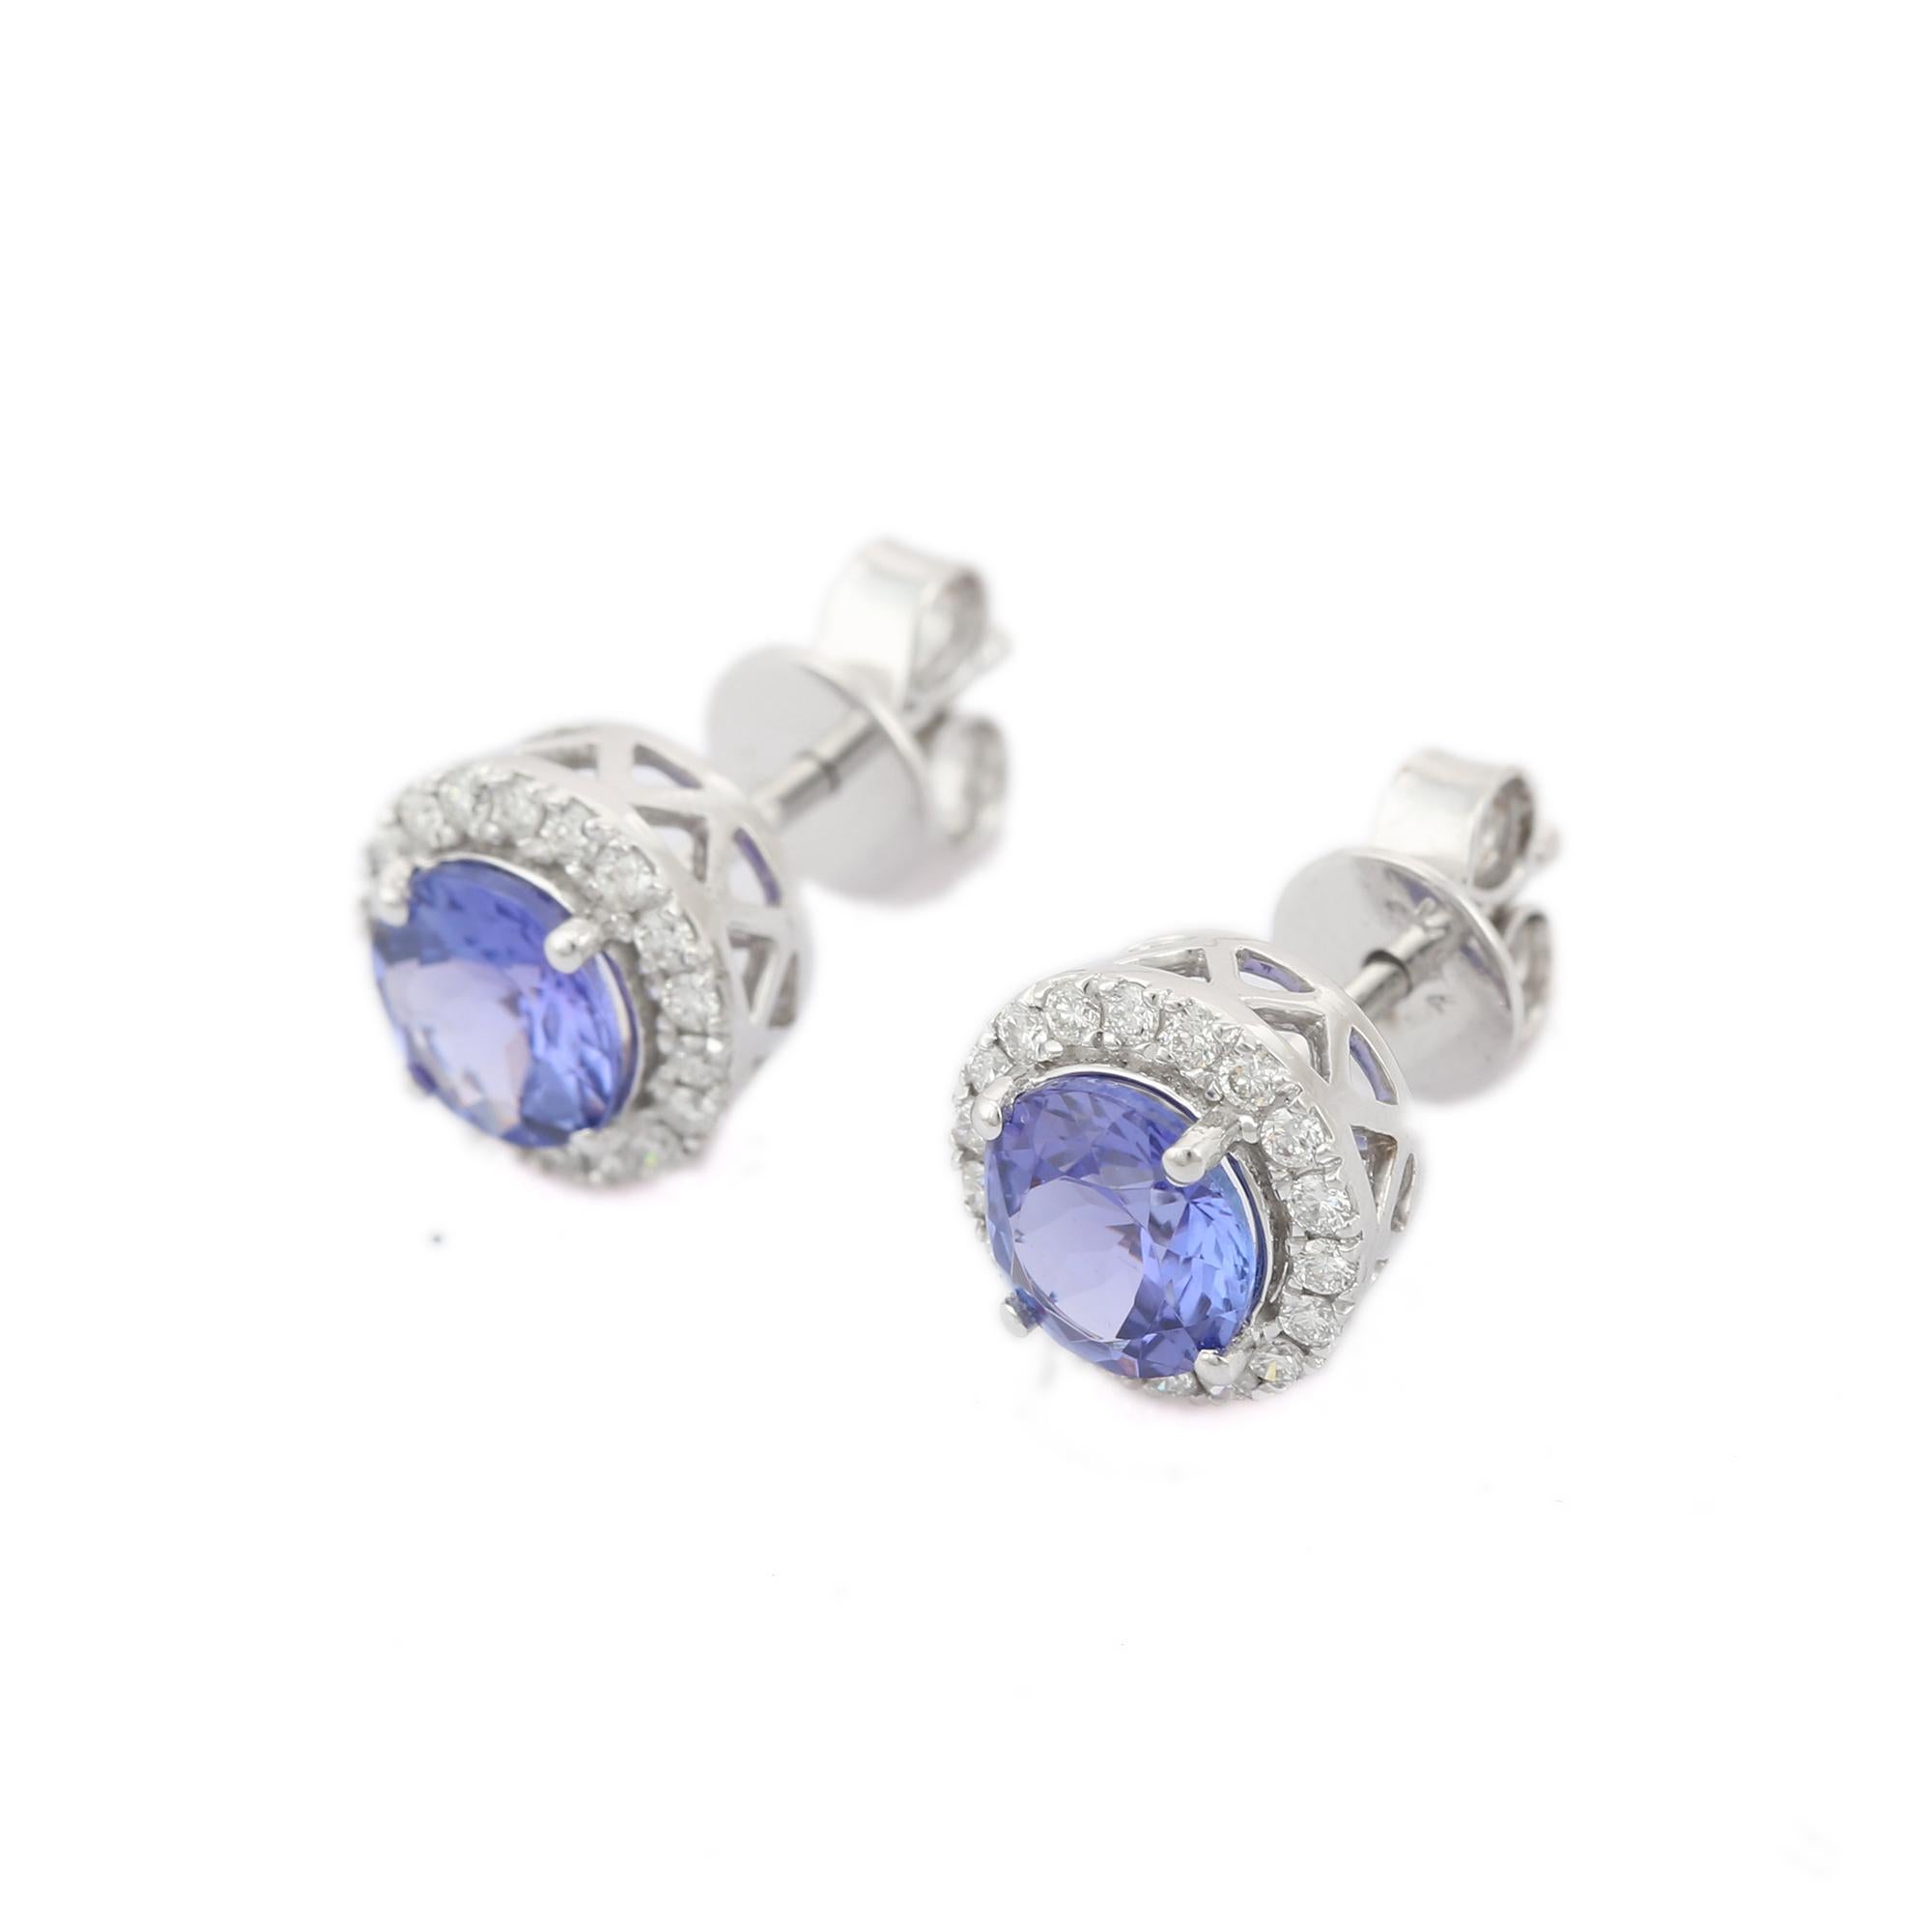 Studs create a subtle beauty while showcasing the colors of the natural precious gemstones and illuminating diamonds making a statement.

Round cut tanzanite studs with diamonds in 18K gold. Embrace your look with these stunning pair of earrings